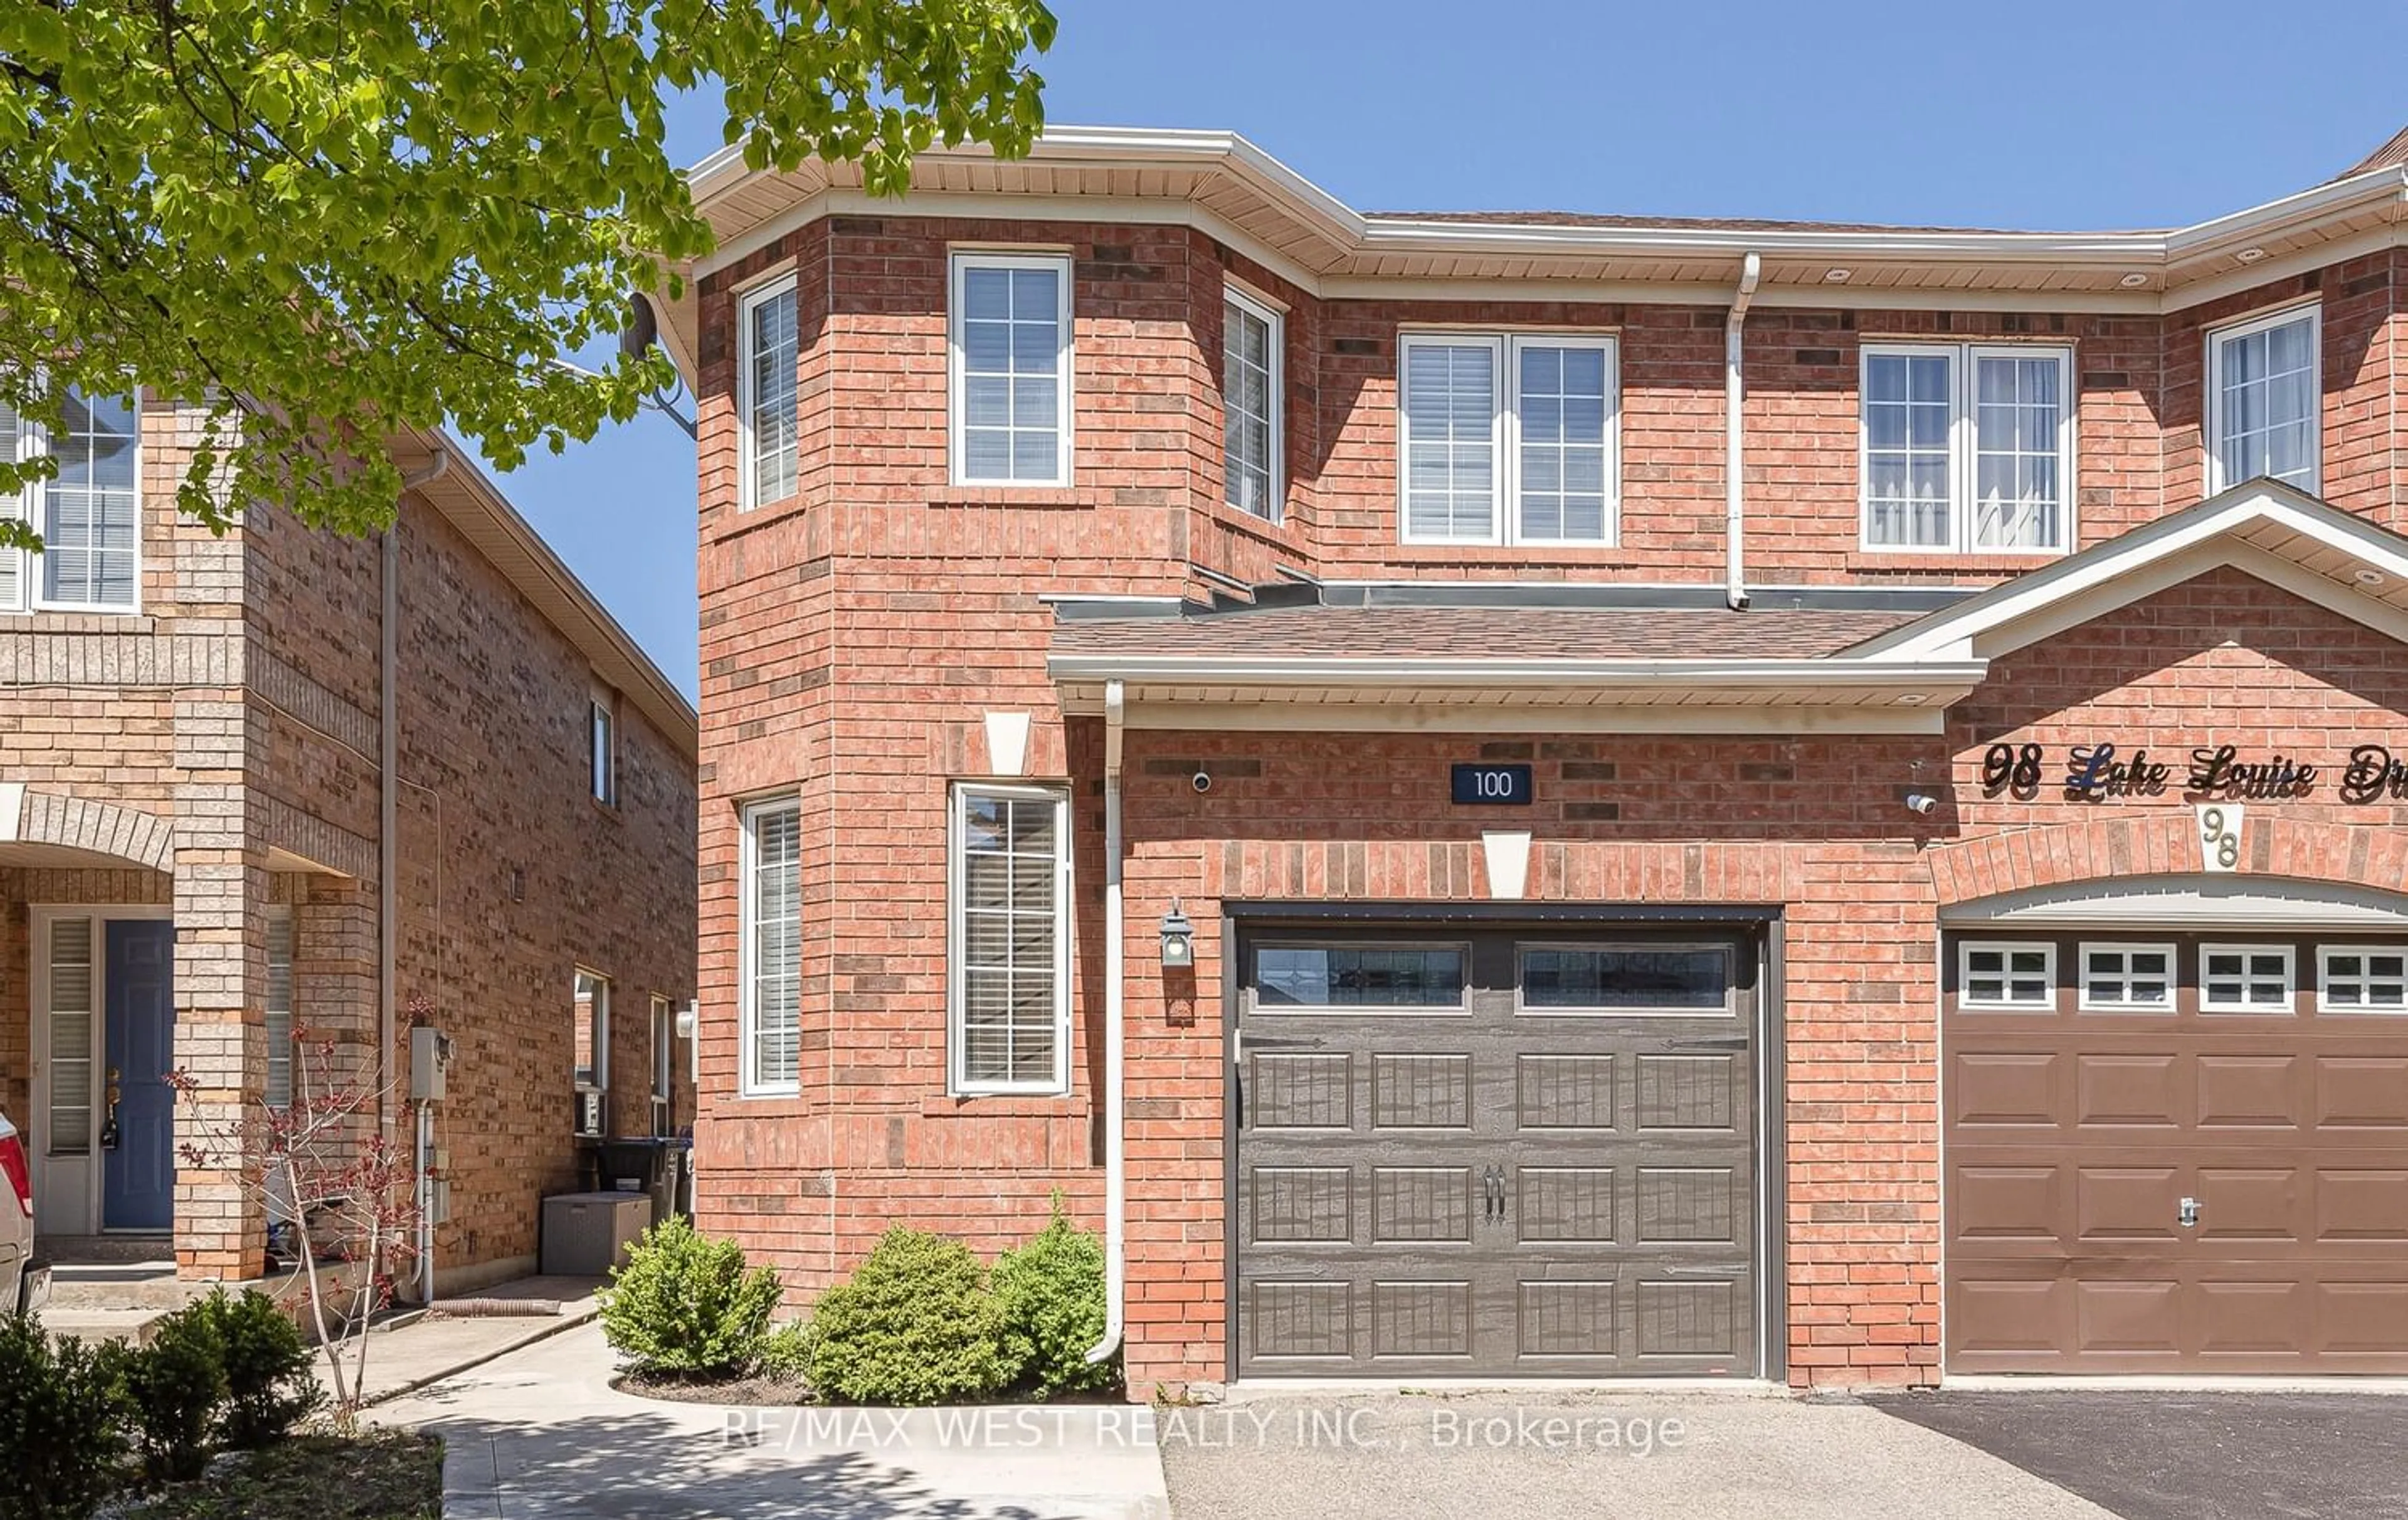 Home with brick exterior material for 100 Lake Louise Dr, Brampton Ontario L6X 4Y6